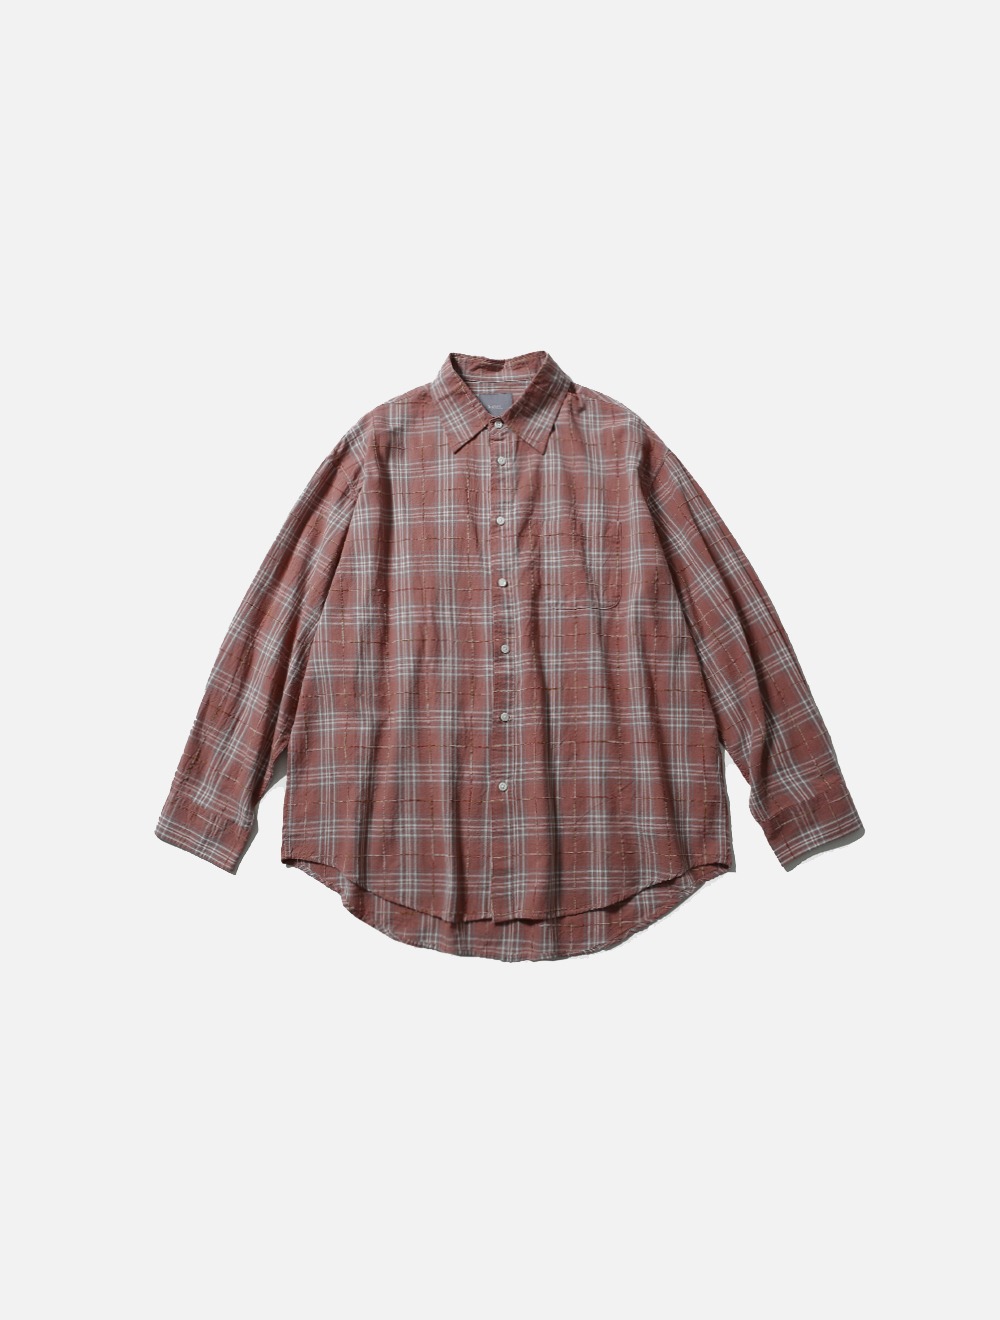 ALL WEATHER OVER SILHOUETTE SHIRT (PINK CHECK)